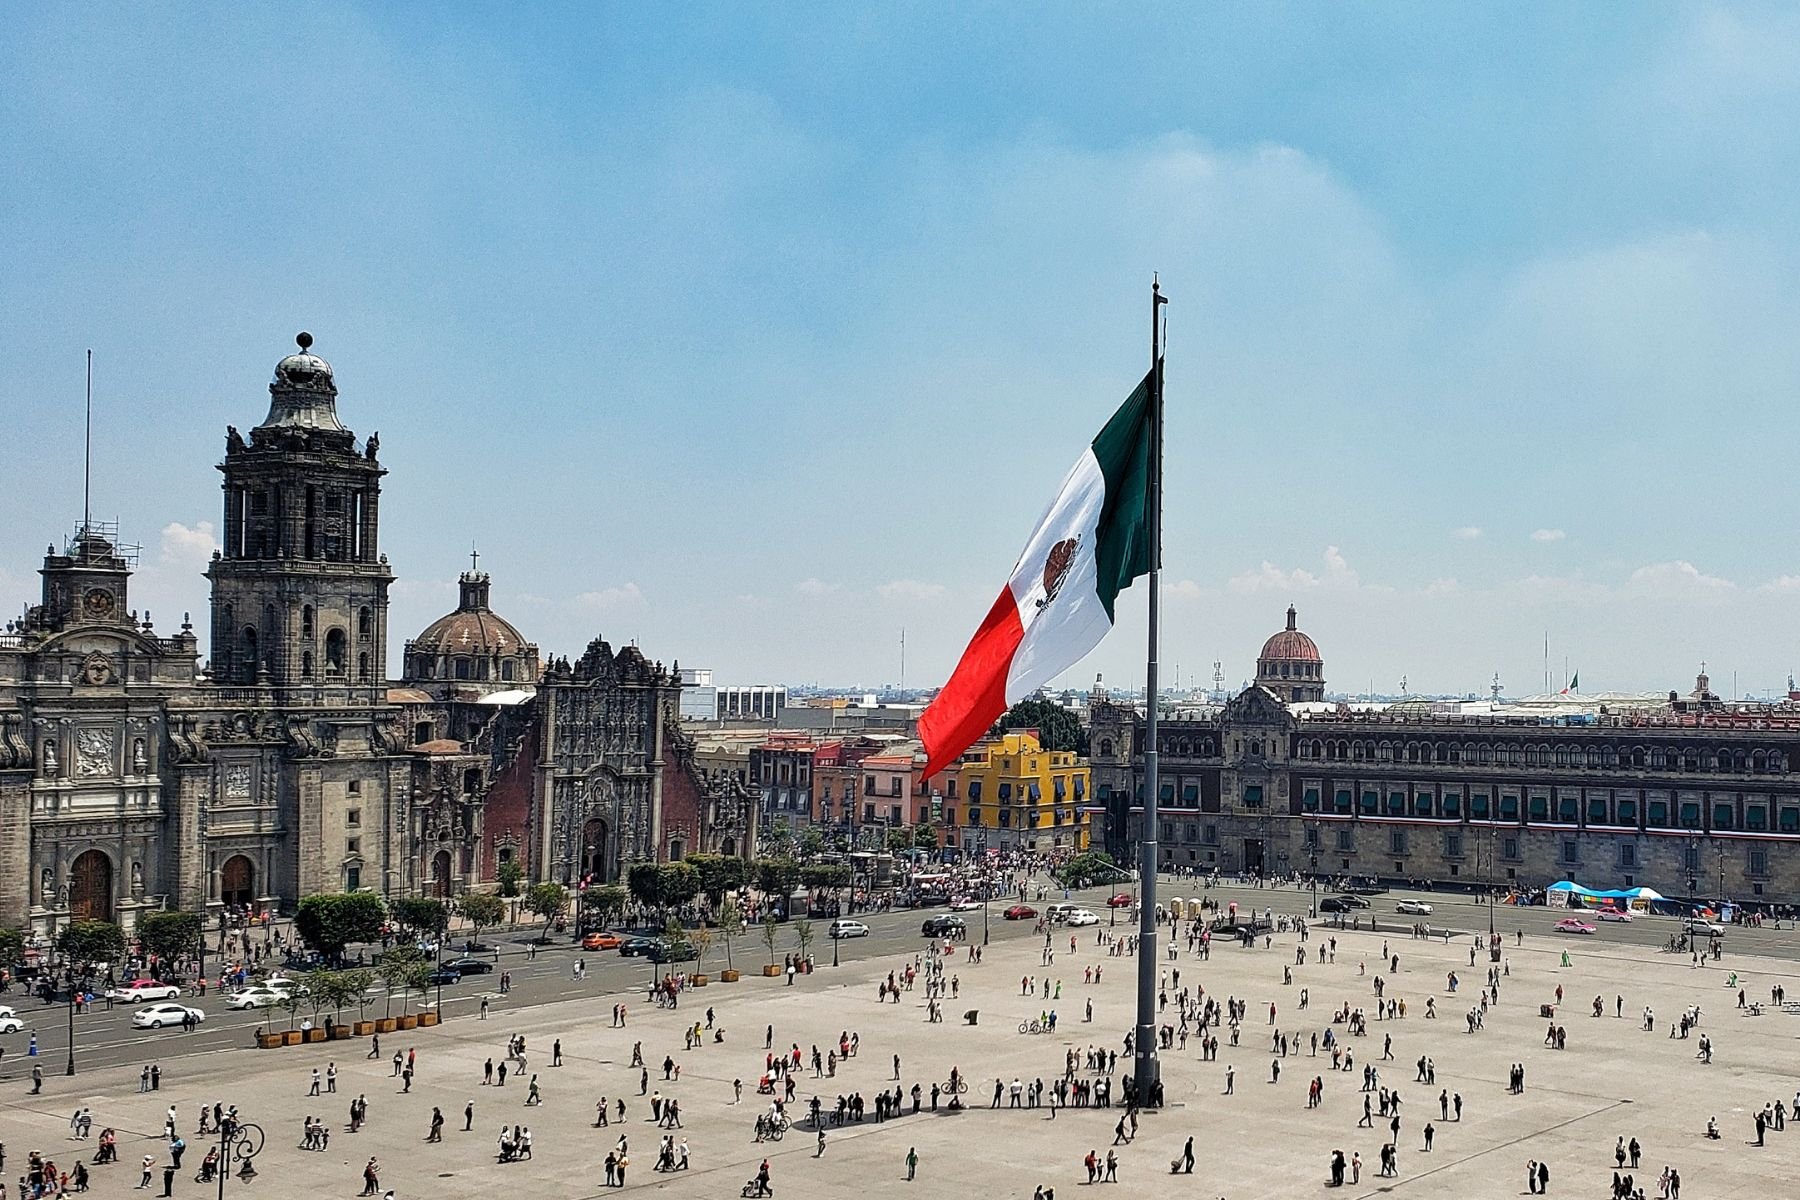 mexico city itinerary stop 6: Zolcalo is the main square in Mexico City's historic center